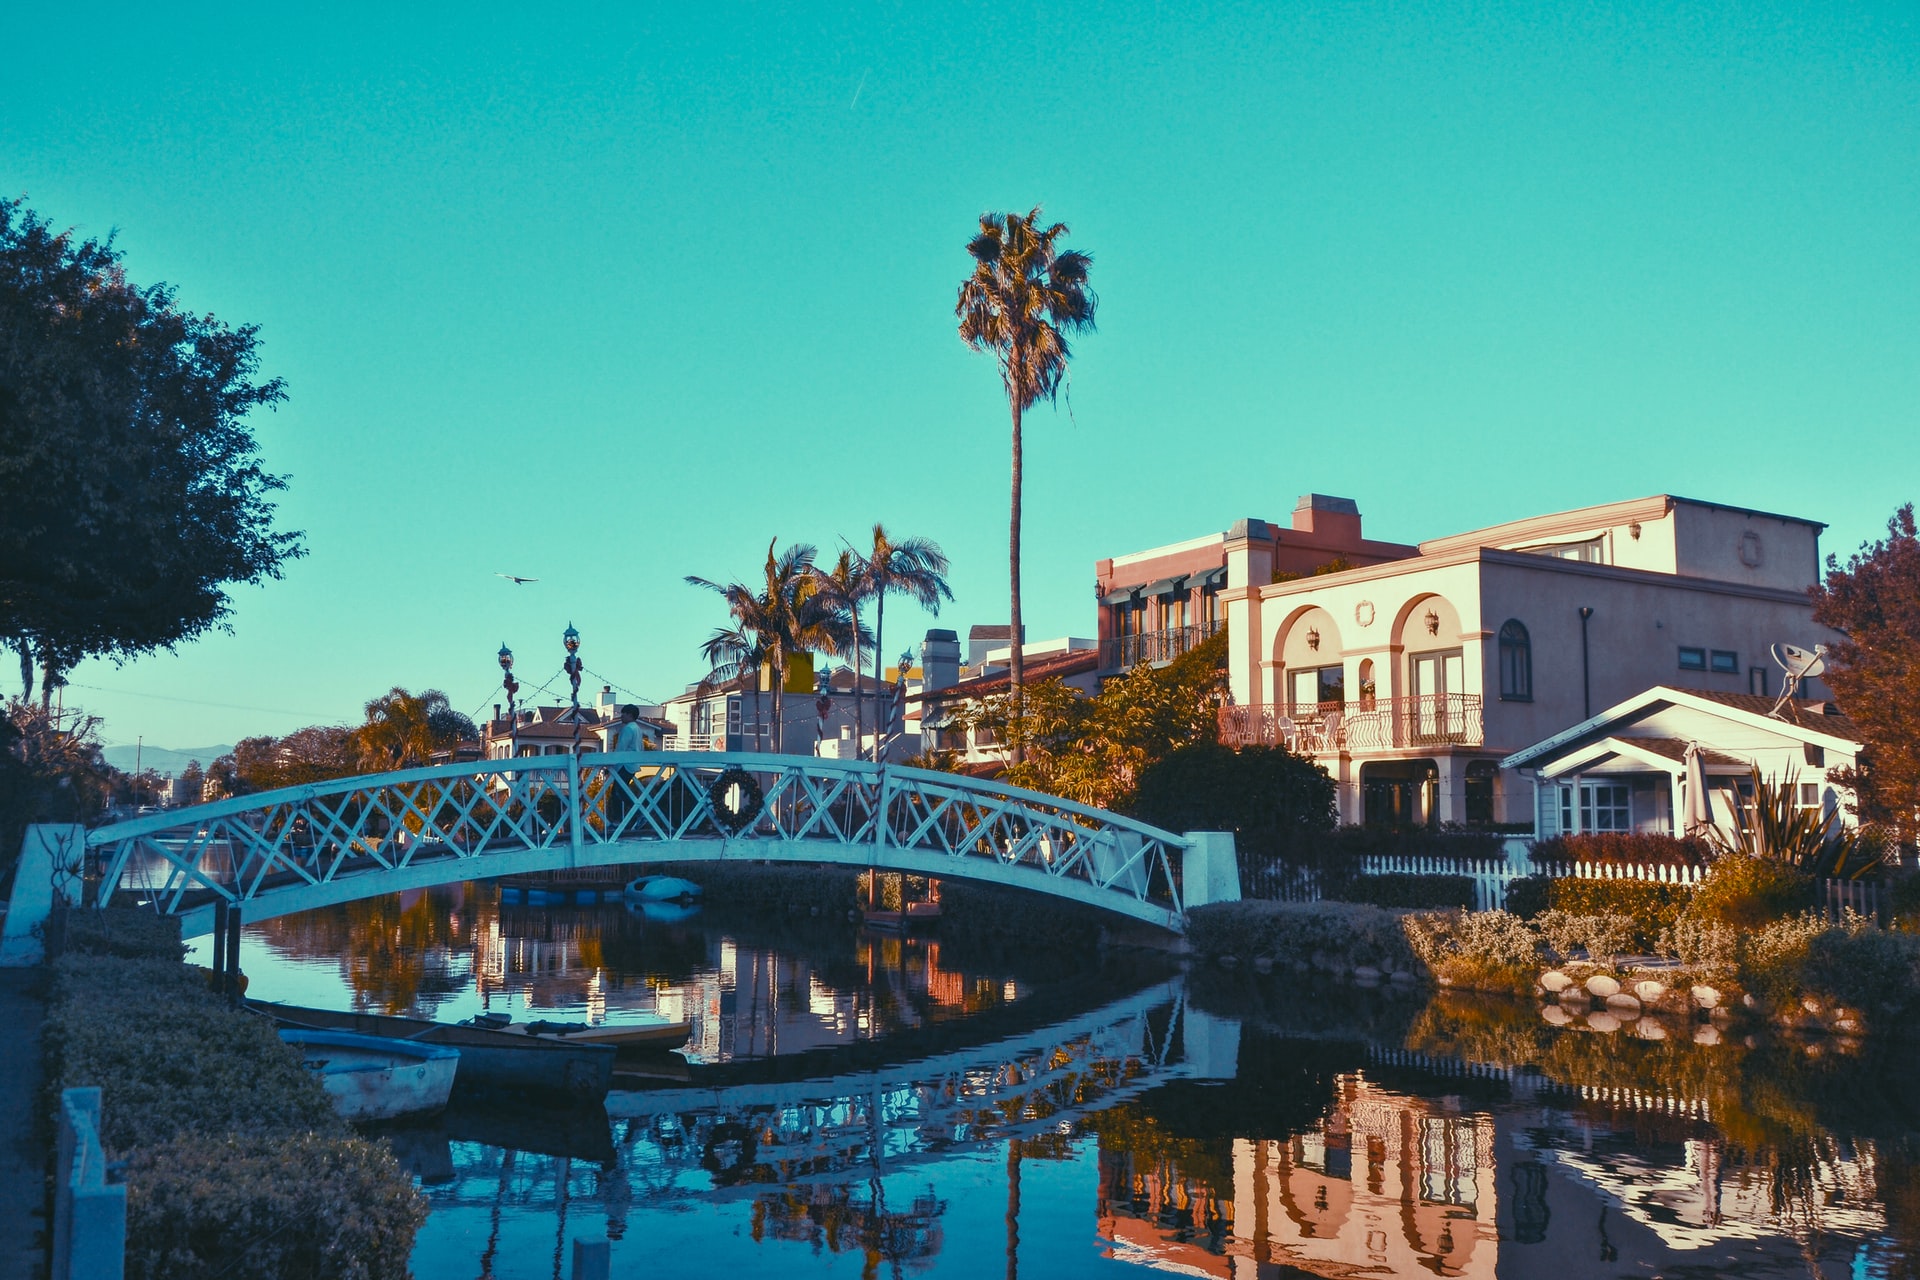 Venice beach canals with bridge over the water